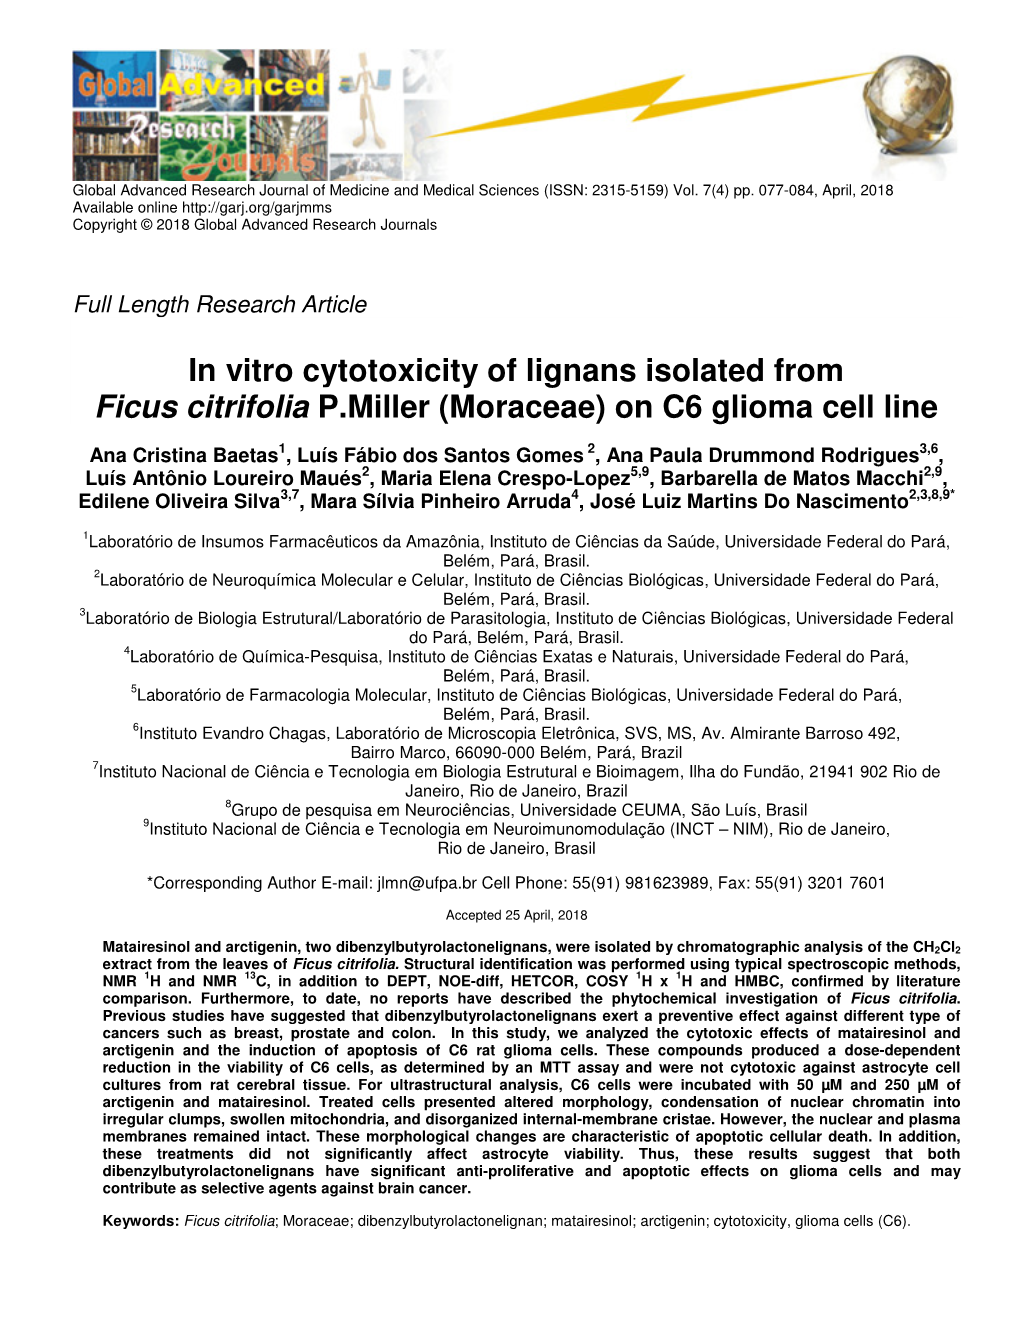 In Vitro Cytotoxicity of Lignans Isolated from Ficus Citrifolia P.Miller (Moraceae) on C6 Glioma Cell Line